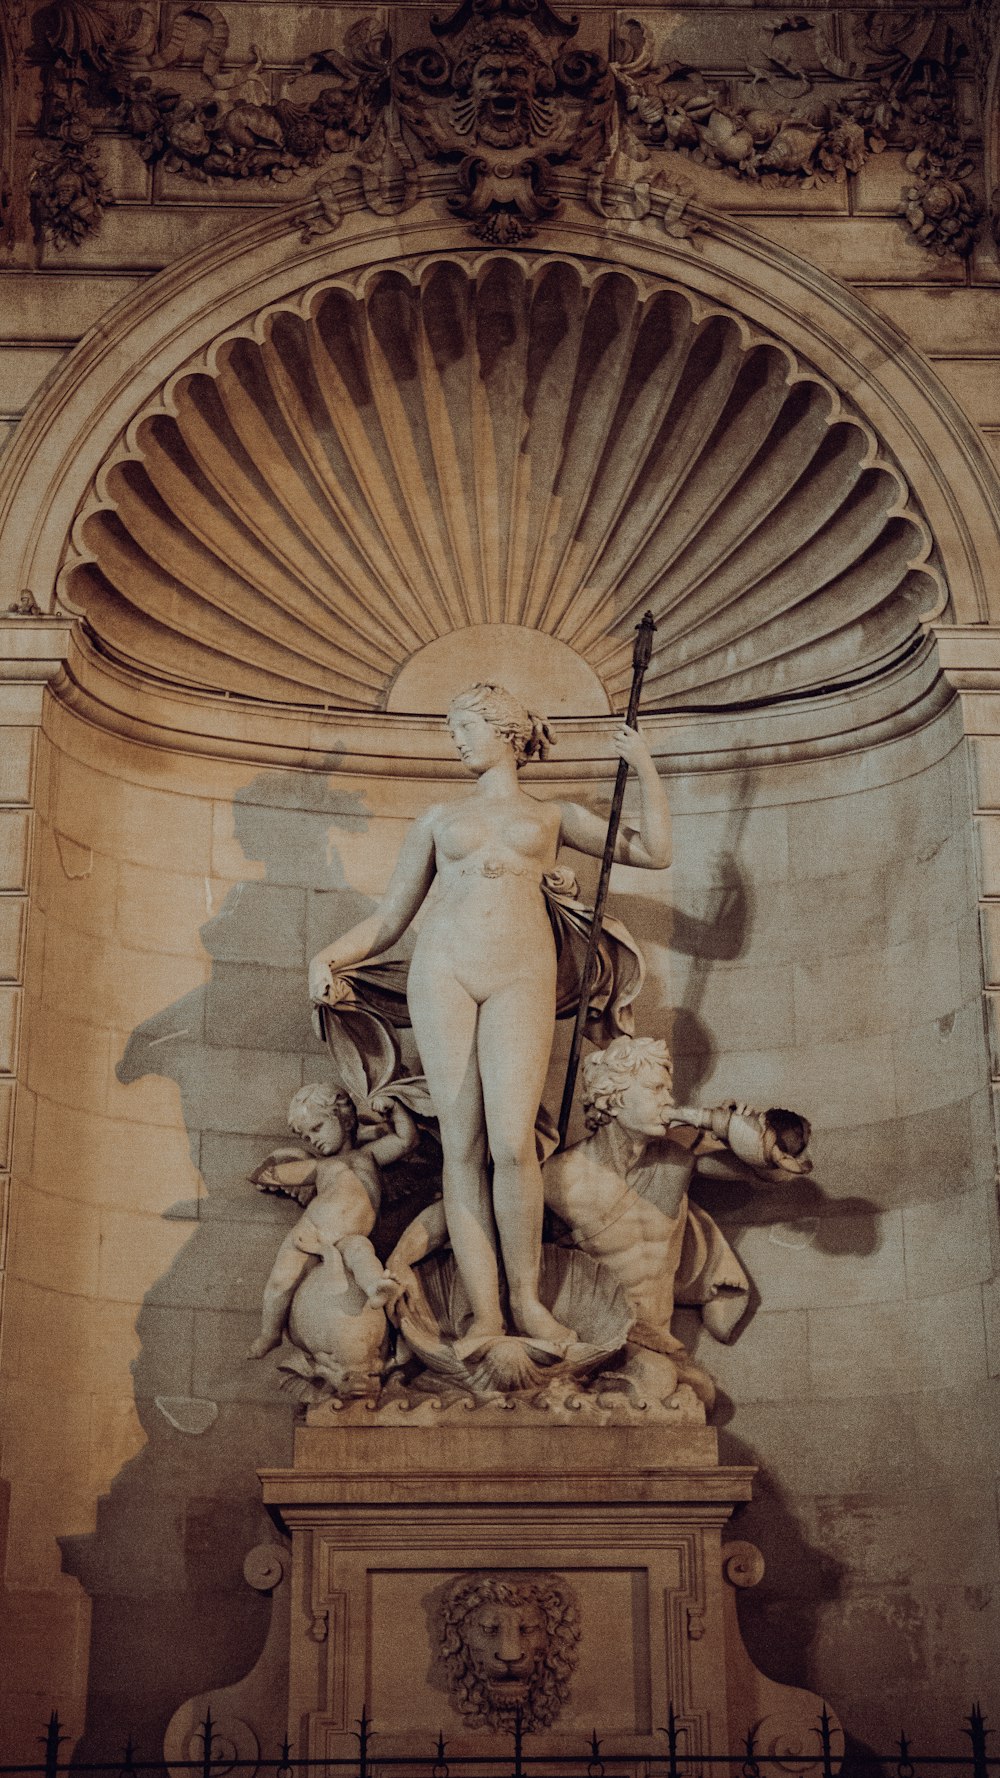 a statue of a person holding a staff